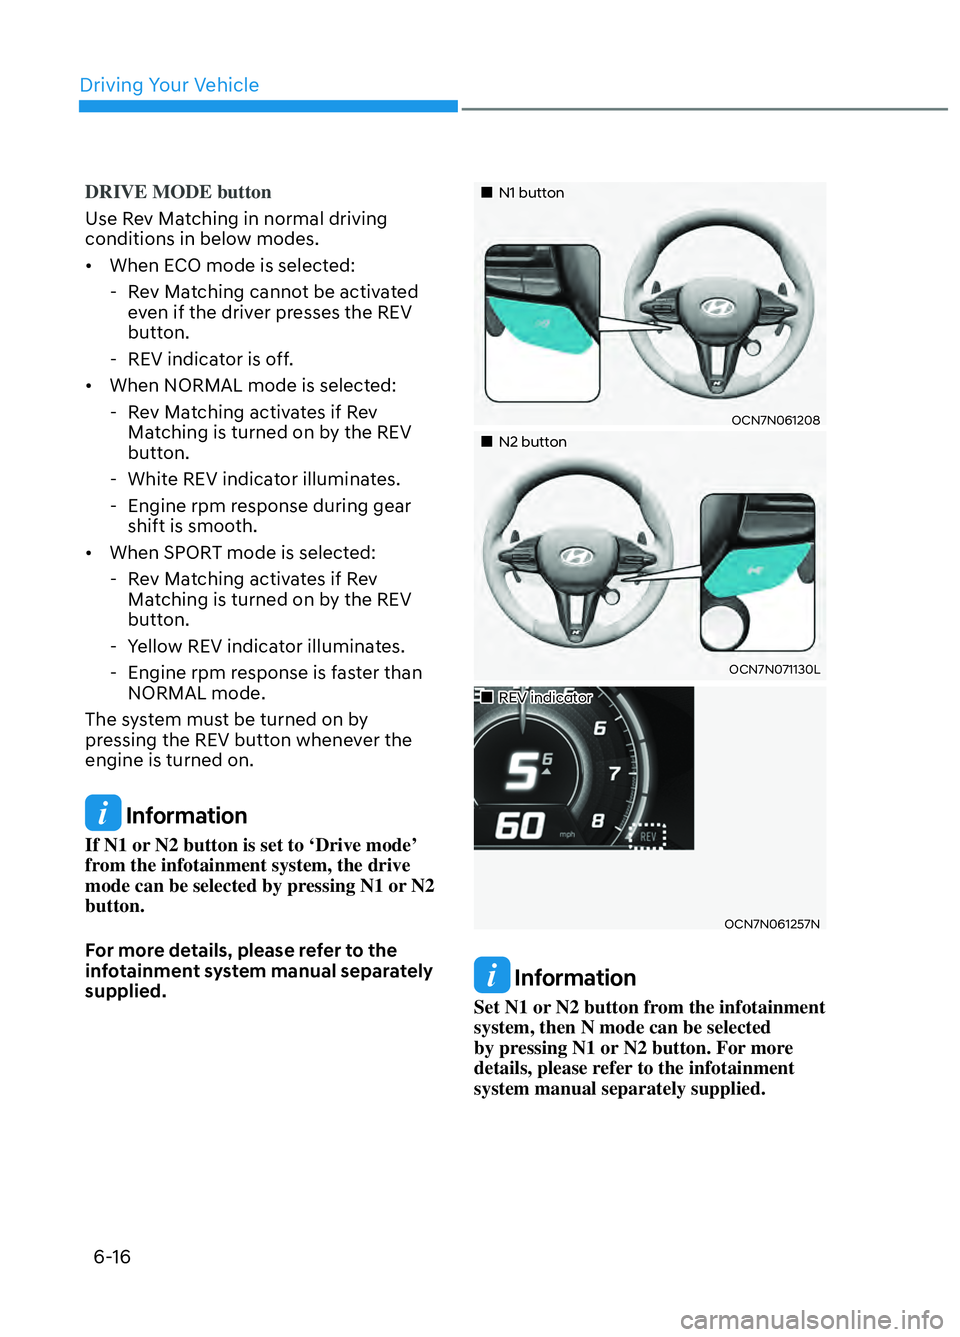 HYUNDAI ELANTRA N 2022  Owners Manual Driving Your Vehicle6-16
DRIVE MODE button
Use Rev Matching in normal driving 
conditions in belo
 w modes.
•  When ECO mode is selected:  - Rev Matching cannot be activated even if the driver press